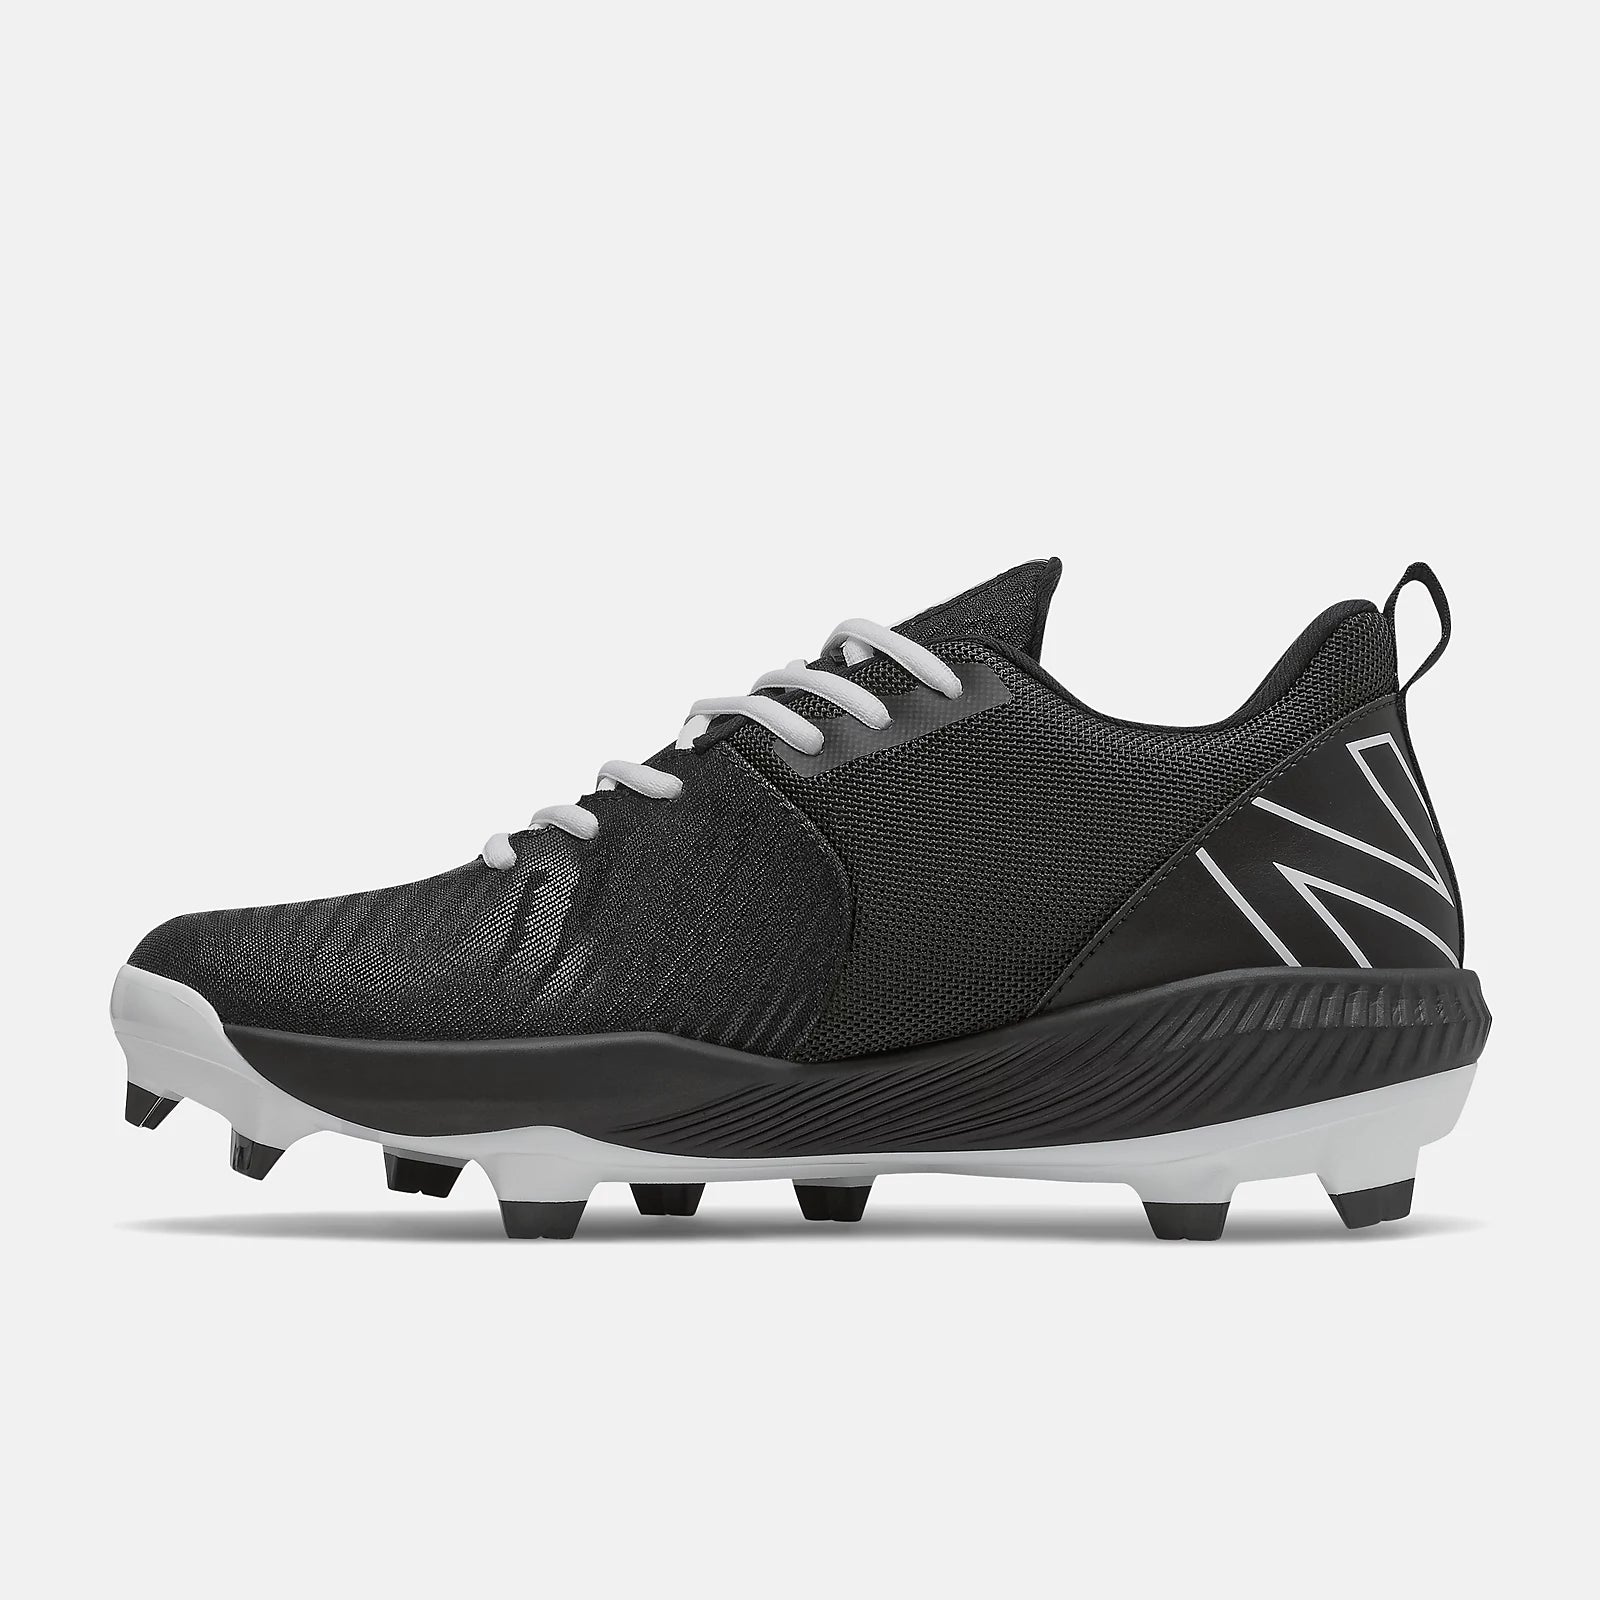 New Balance - Black/White FuelCell 4040v6 Molded Cleats (PL4040K6)